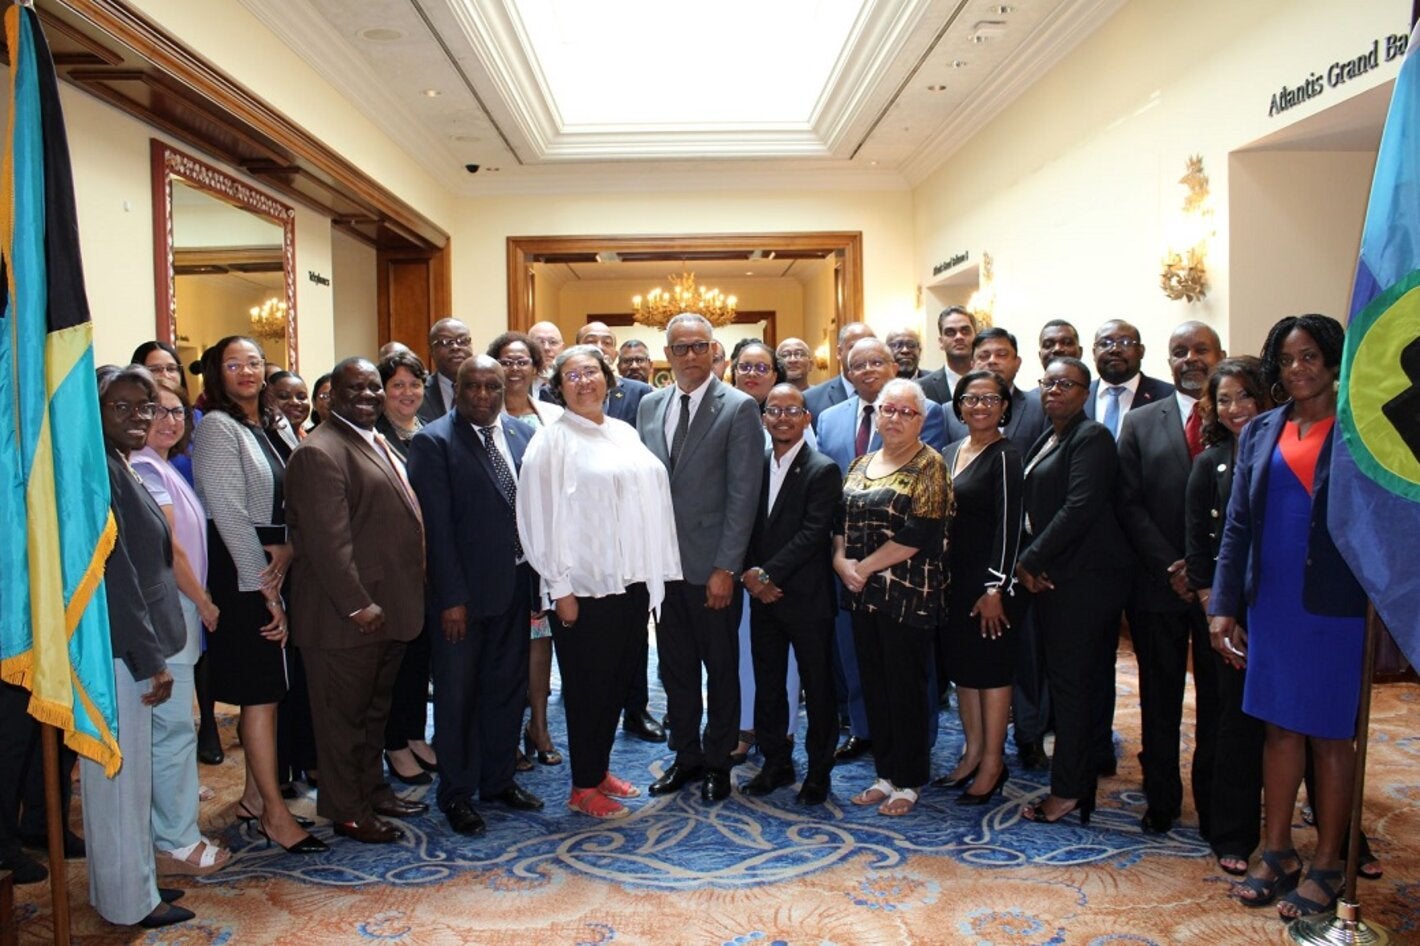 Caribbean Health Ministers and technical advisors who participated in the 29th Special COHSOD Health Meeting